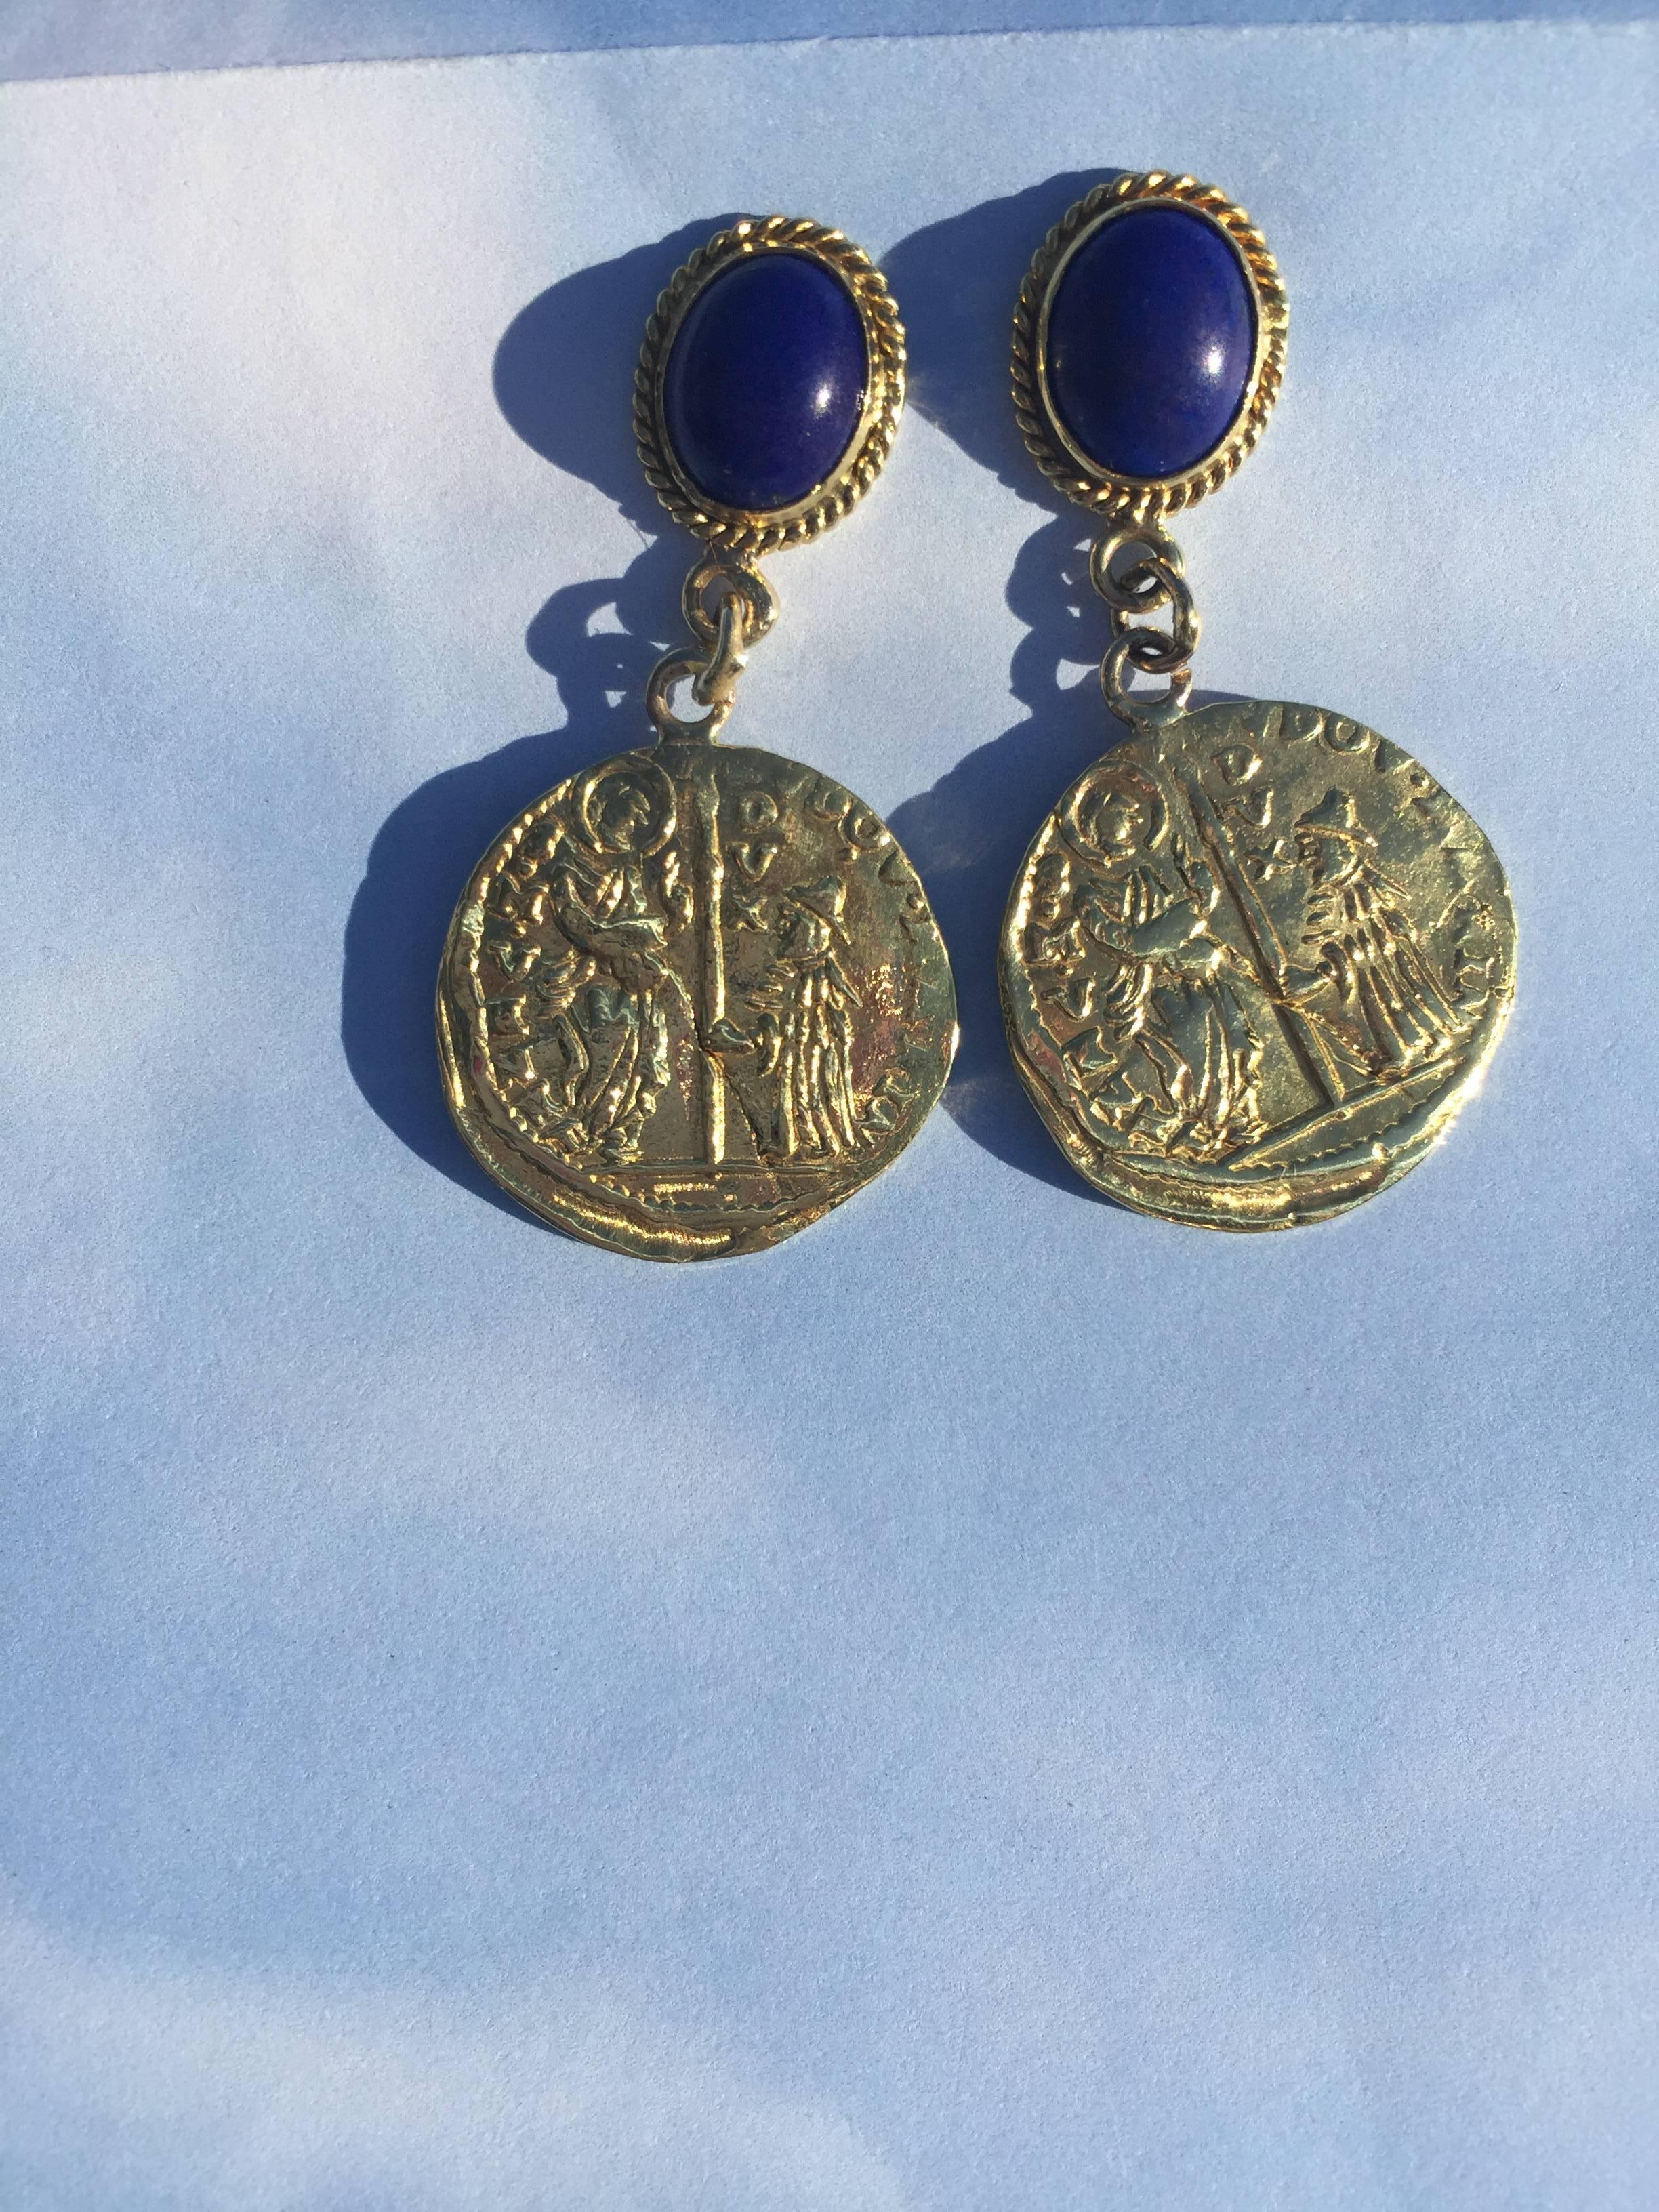 Exquisite for day or evening these 22mm coin earrings are cast from the original Venetian coin. the 6x8mm lapis cabochons are bezeled in 18K gold